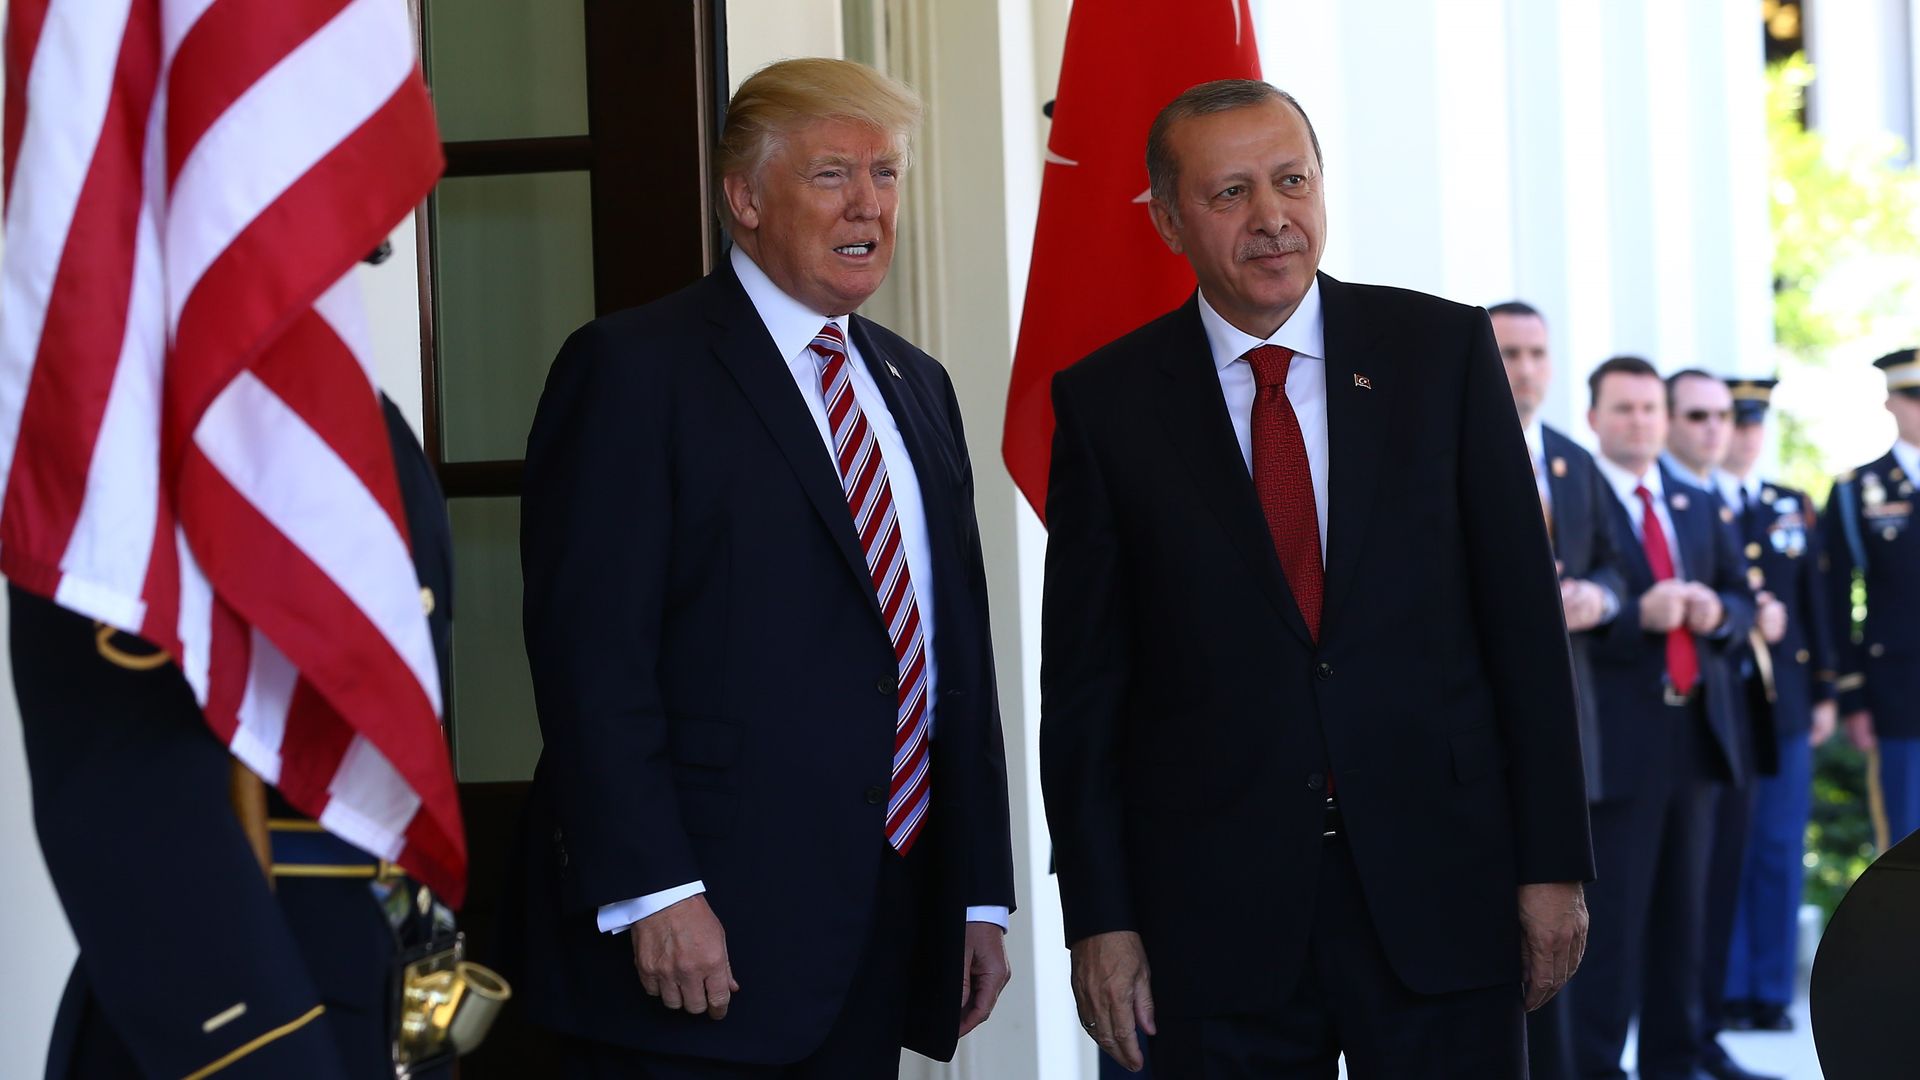 President Trump and President Erdogan stand side-by-side outside the White House